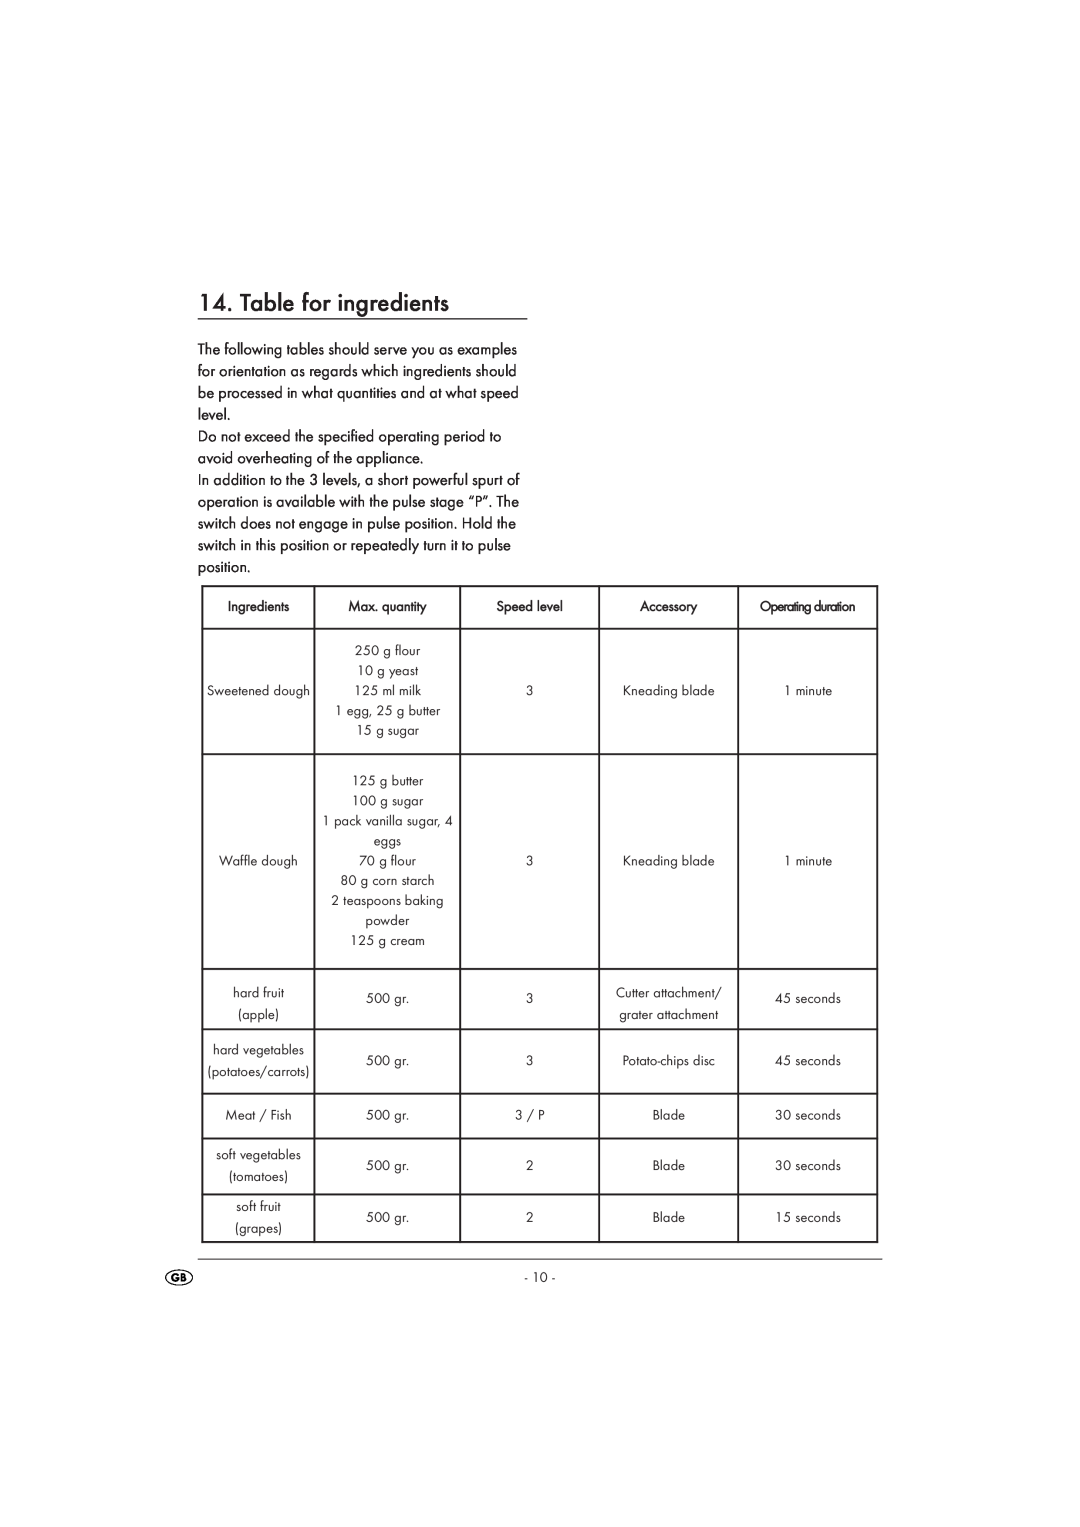 Kompernass KH 700 operating instructions Table for ingredients 